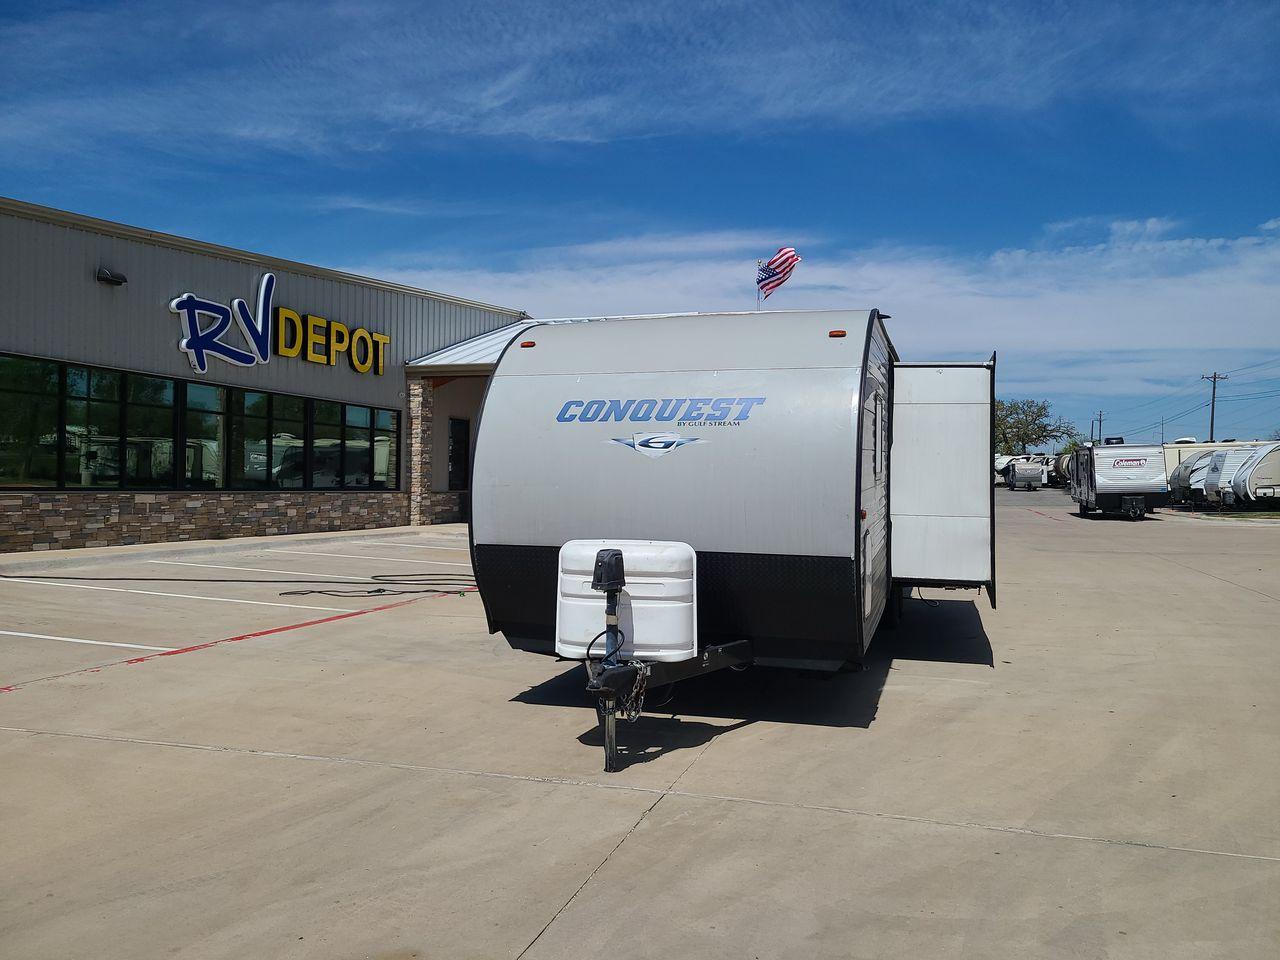 2018 WHITE GULF STREAM CONQUEST 274QB - (1NL1G322XJ1) , Length: 32.25 ft. | Dry Weight: 6,230 lbs. | Slides: 1 transmission, located at 4319 N Main St, Cleburne, TX, 76033, (817) 678-5133, 32.385960, -97.391212 - Take advantage of the 2018 Gulf Stream Conquest 274QB Travel Trailer and enjoy camping with the family. This travel trailer offers a comfortable and convenient living area for your outdoor adventures, designed with comfort and convenience in mind. The measurements of this unit are 32.25 ft in len - Photo #0